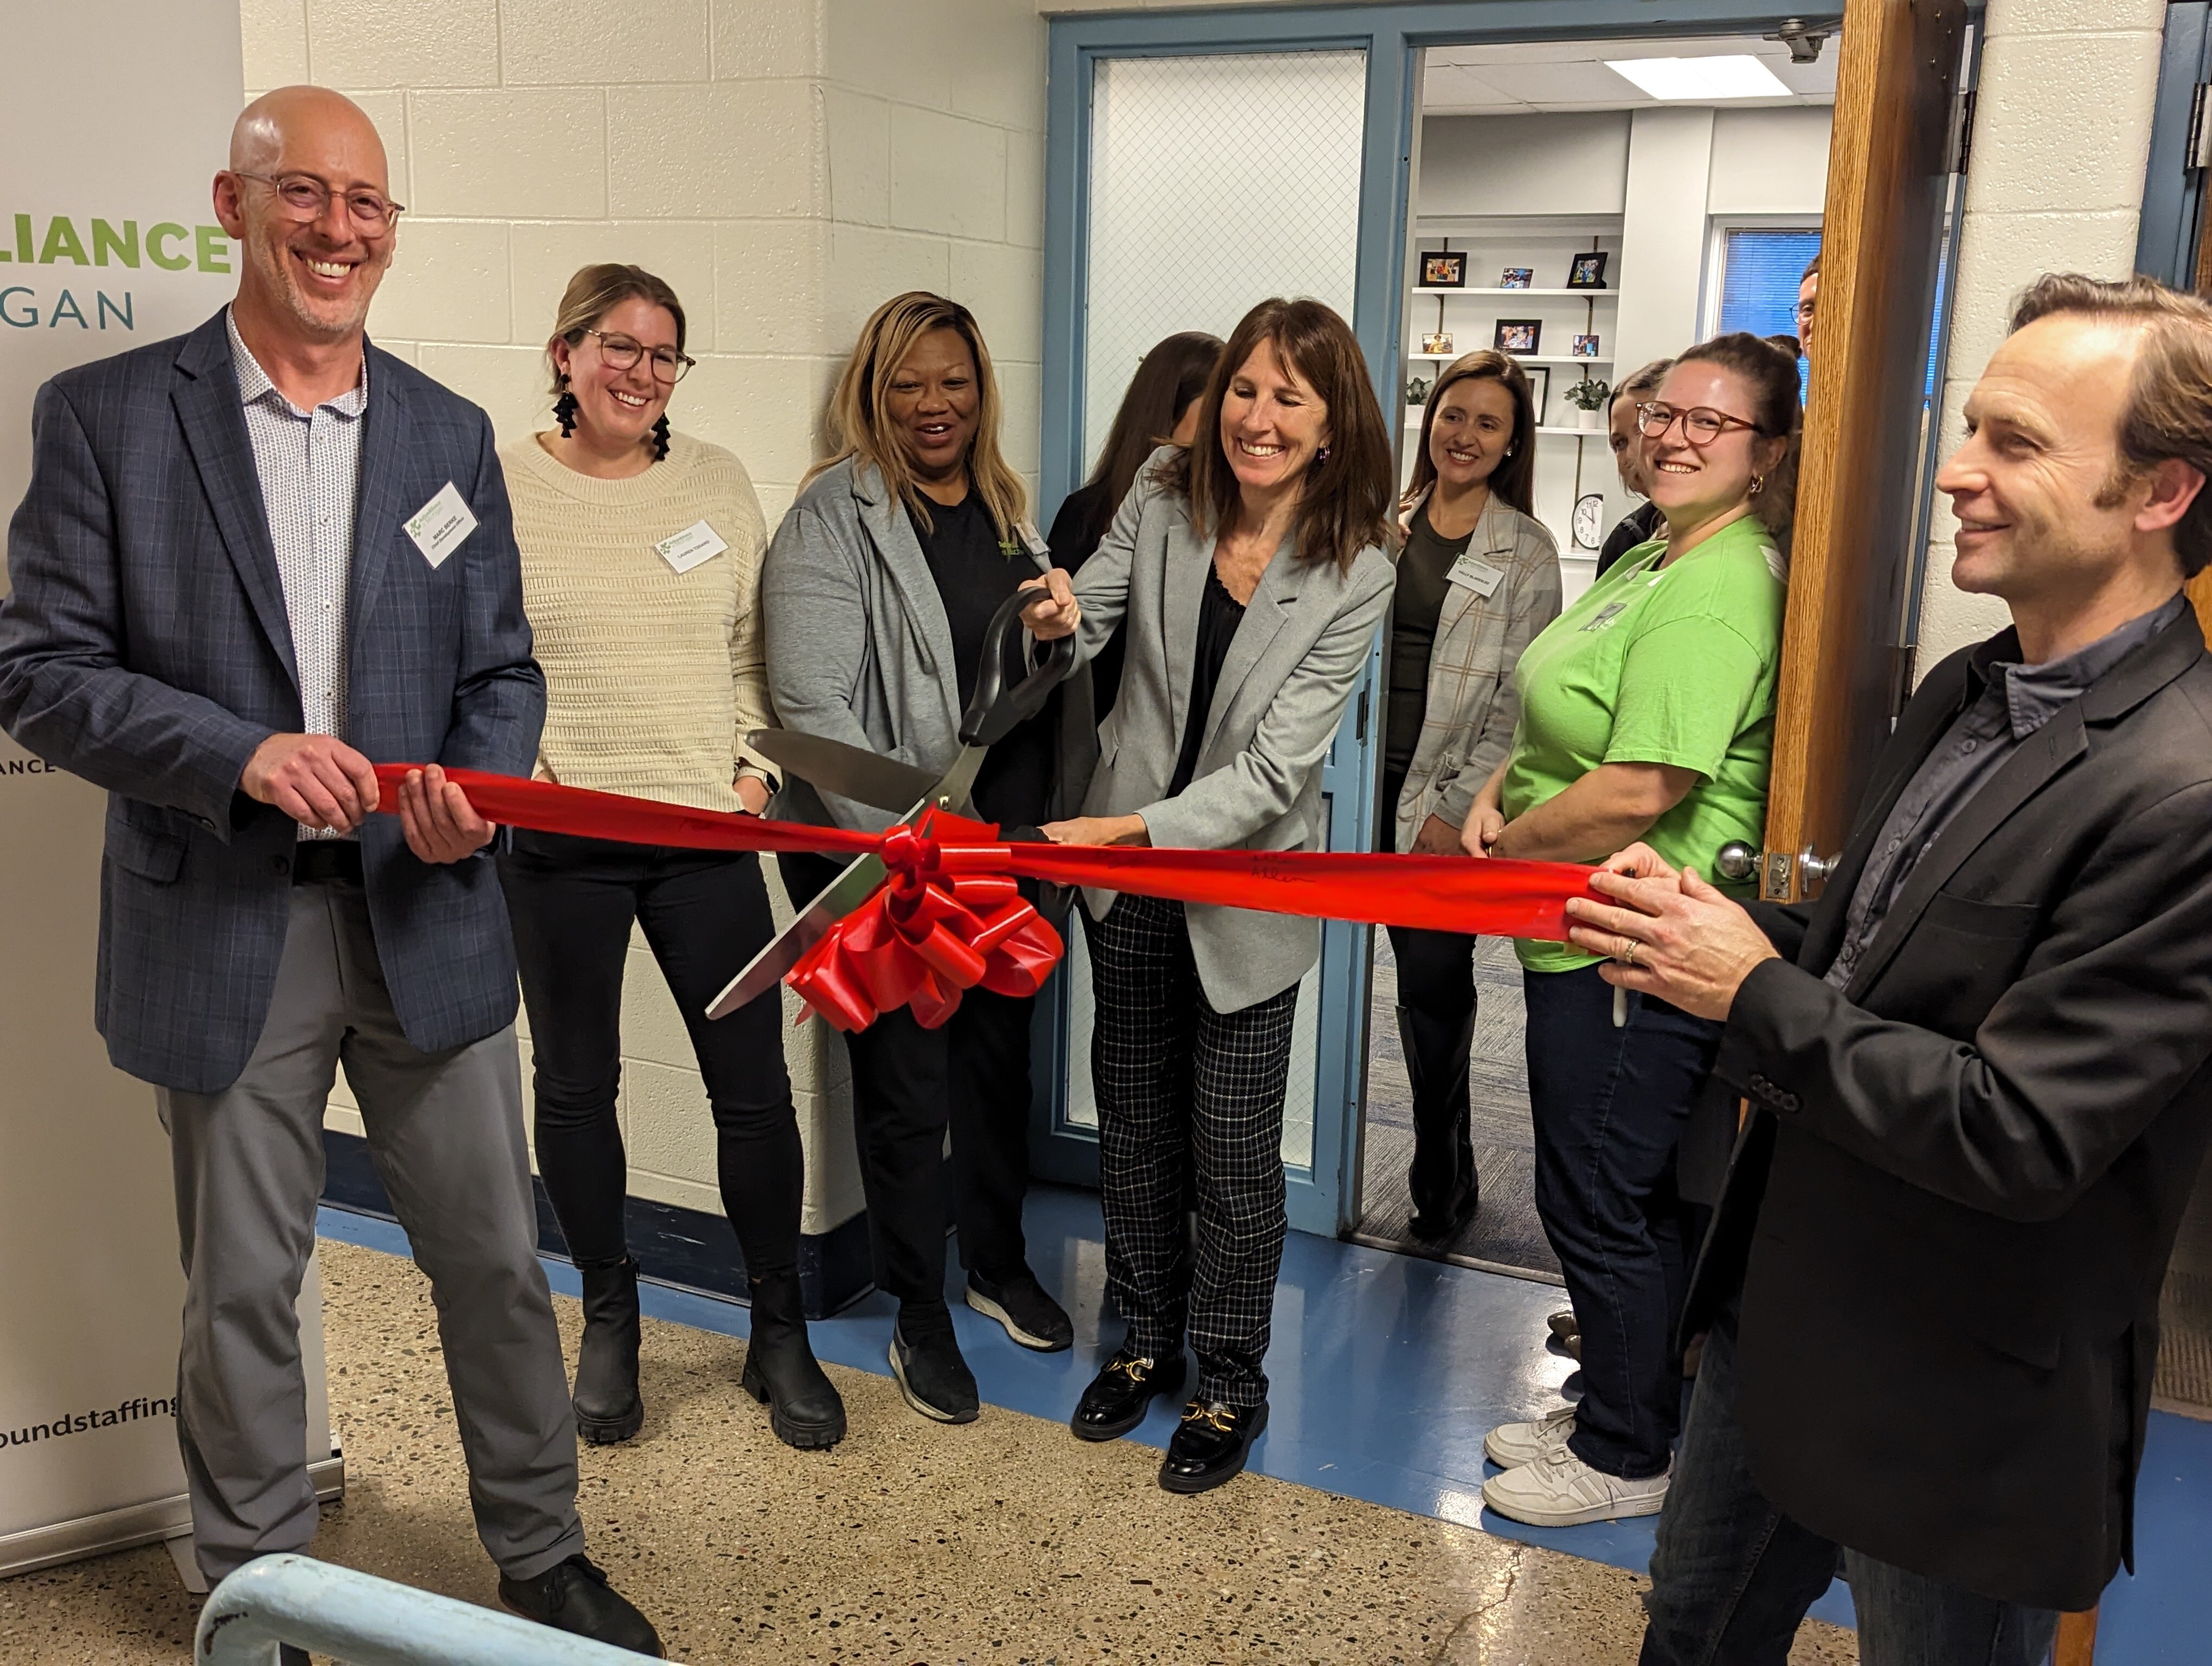 The CEO Colleen Allen cuts the ribbon to the new office alongside other AAoM staff members to celebrate the grand opening of AAoM's Grand Rapids office.